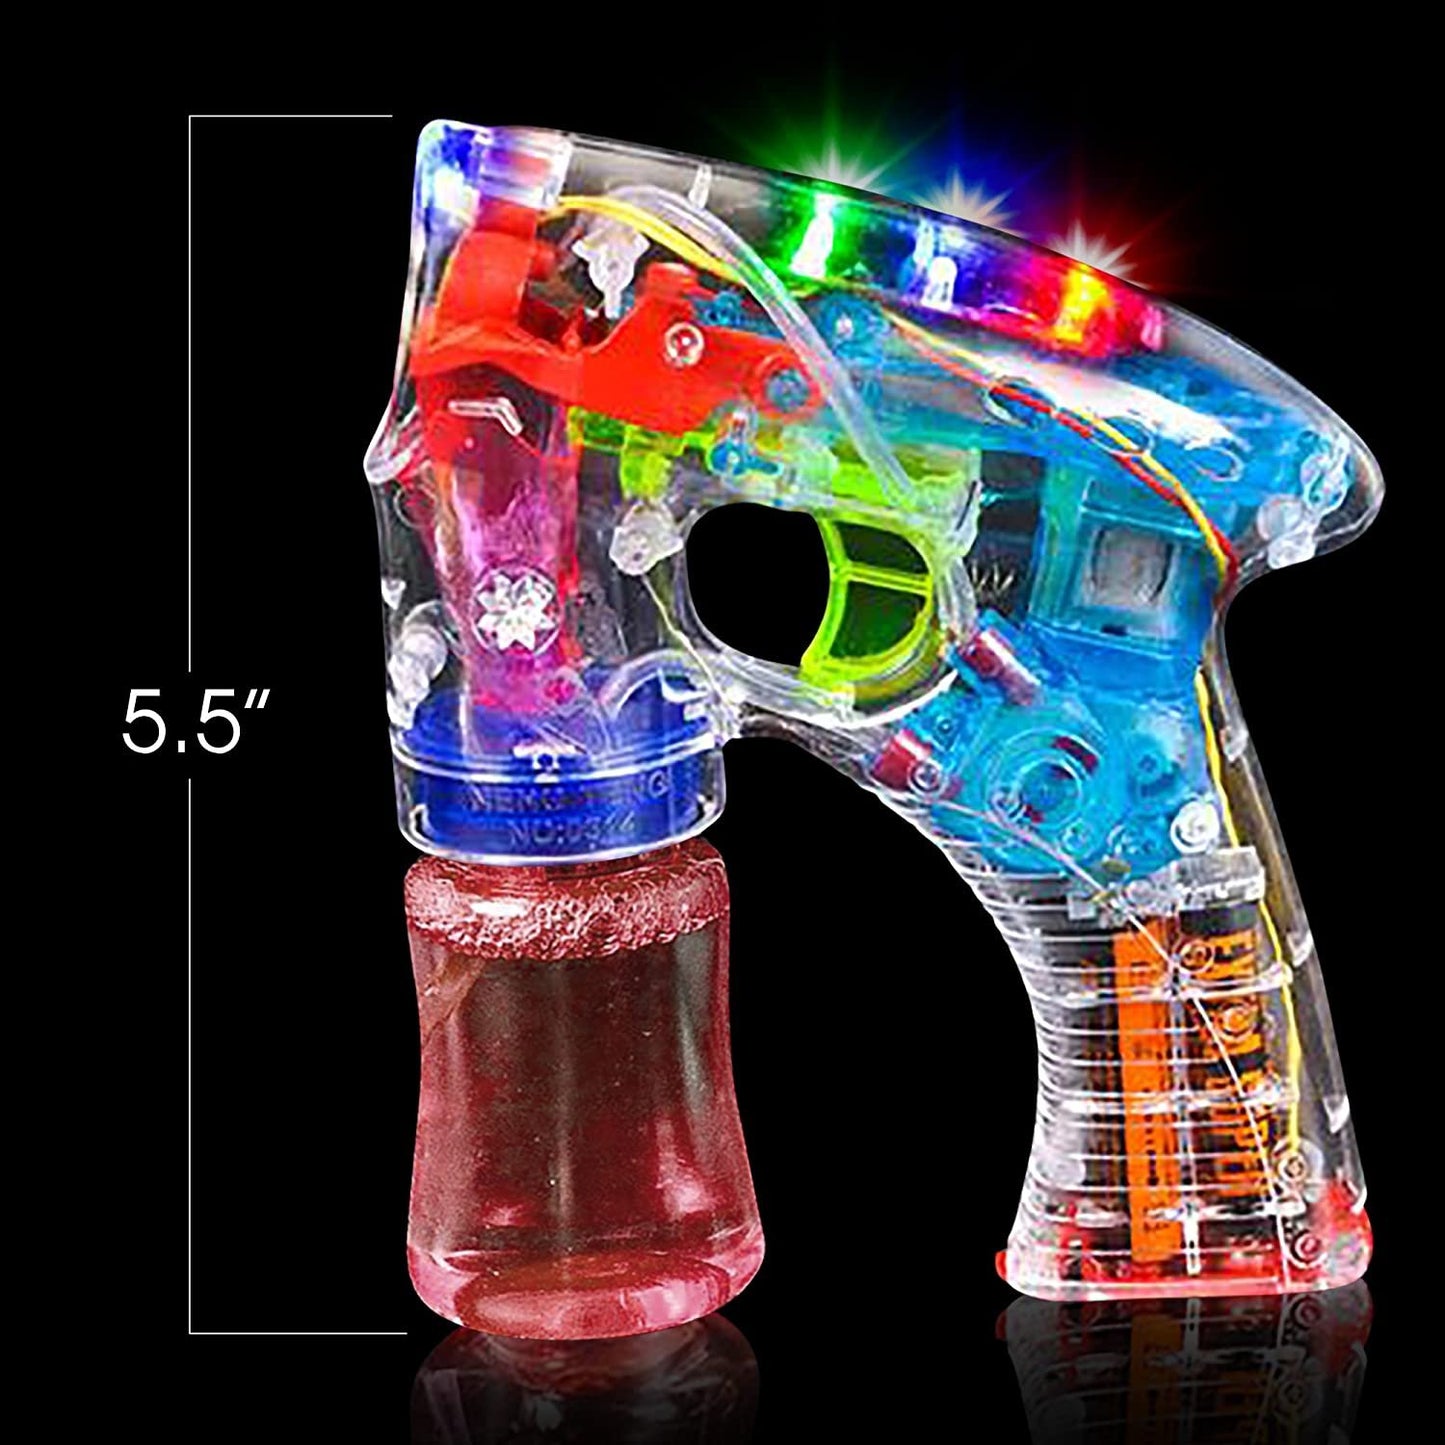 ArtCreativity Light Up Bubble Gun - Set of 3 - Medium Lightweight Design - Perfect for Summertime - Fun, Engaging and Entertaining - Party Favor, Amazing Gift Idea Boys Girls - Batteries Included